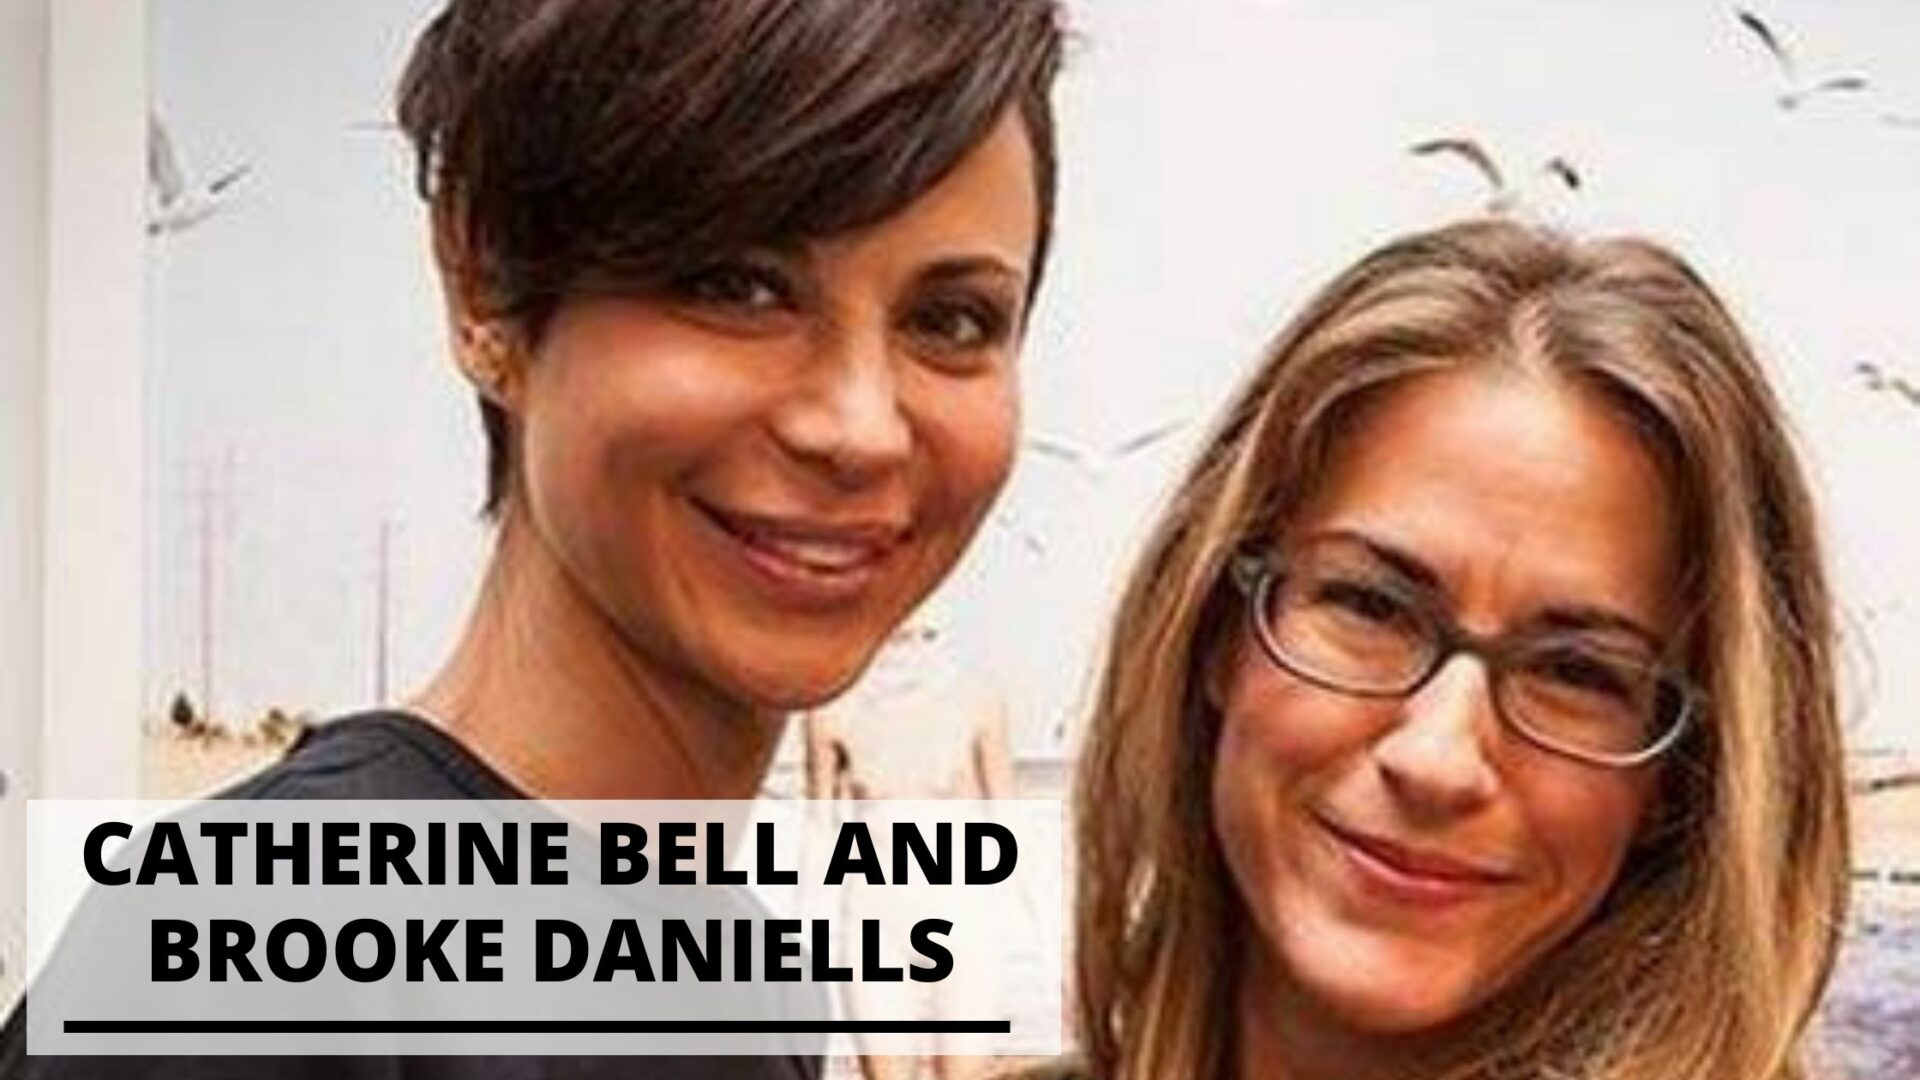 You are currently viewing Get to Know Brooke Daniells and Catherine Bell